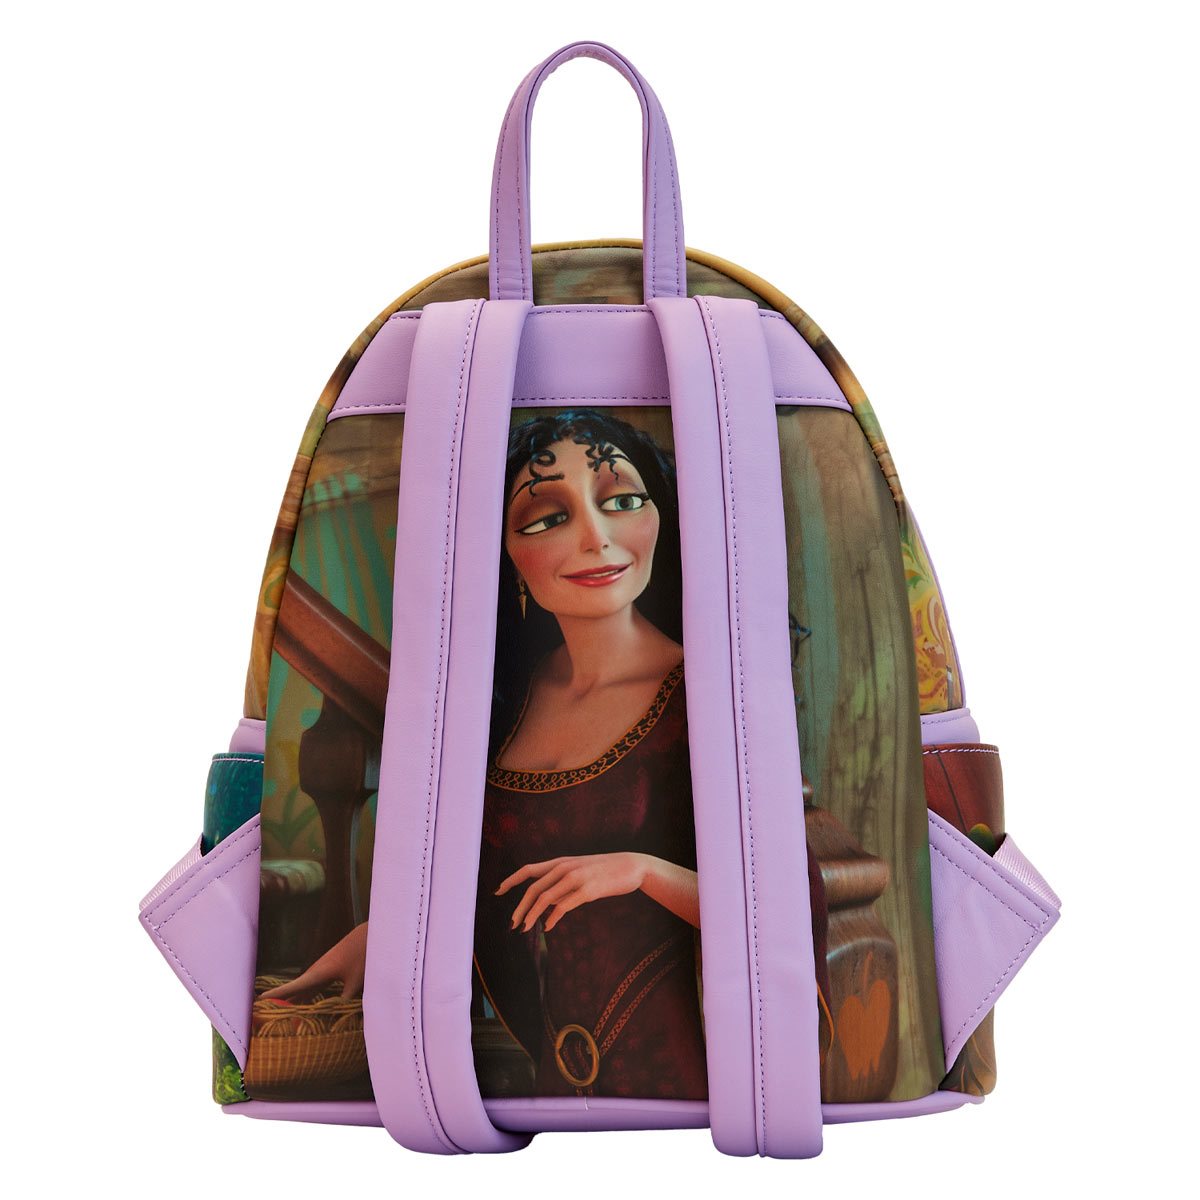 Loungefly Disney Tangled Rapunzel Swinging from Tower Mini Backpack